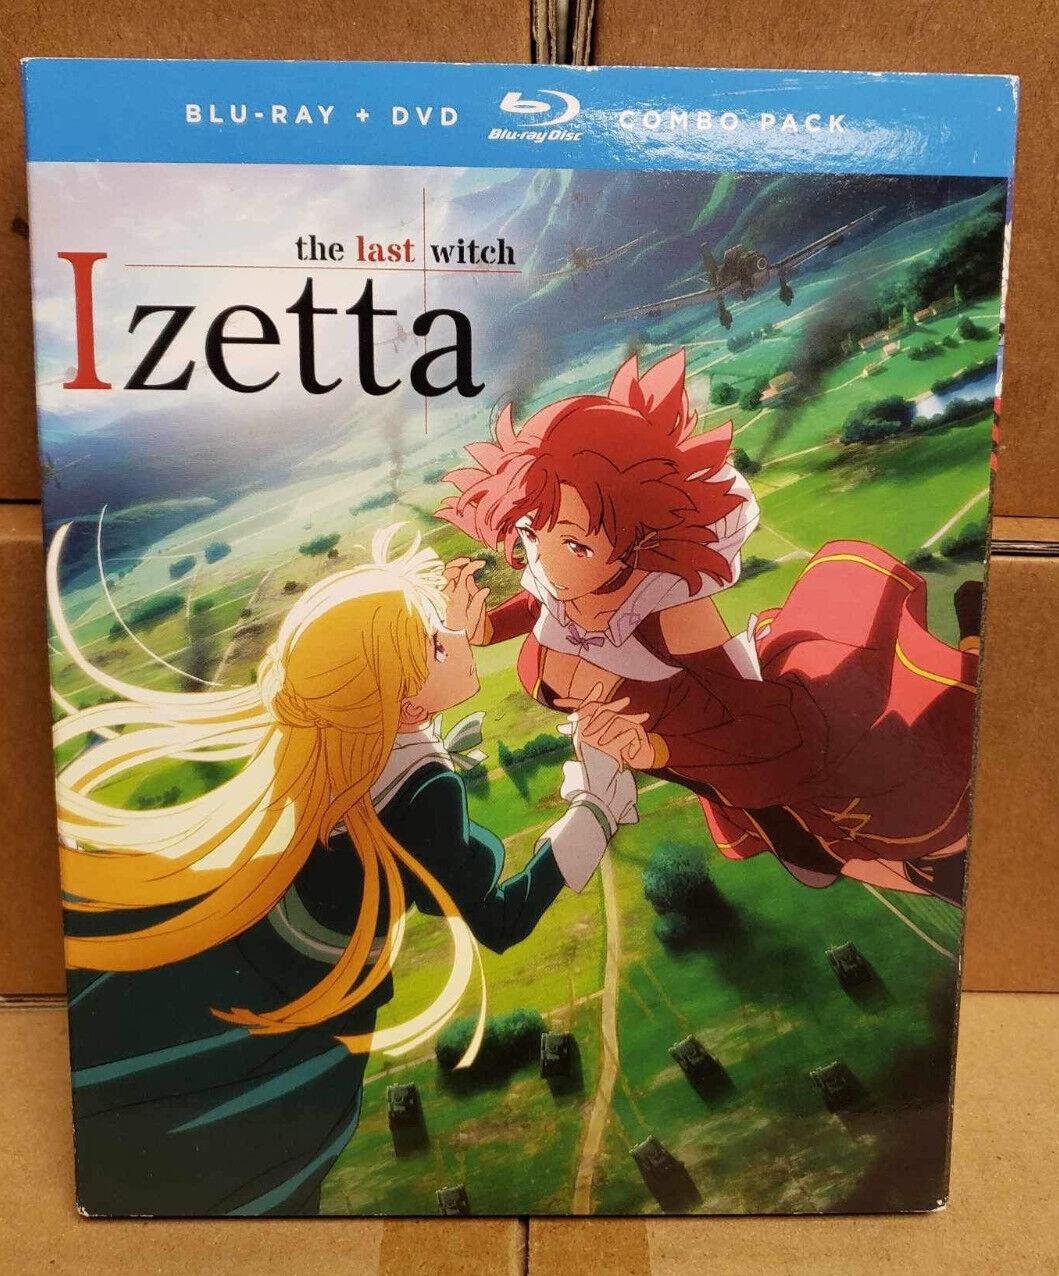 Izetta: The Last Witch - The Complete Series (Blu-ray/DVD, 2018, 4-Disc Set)